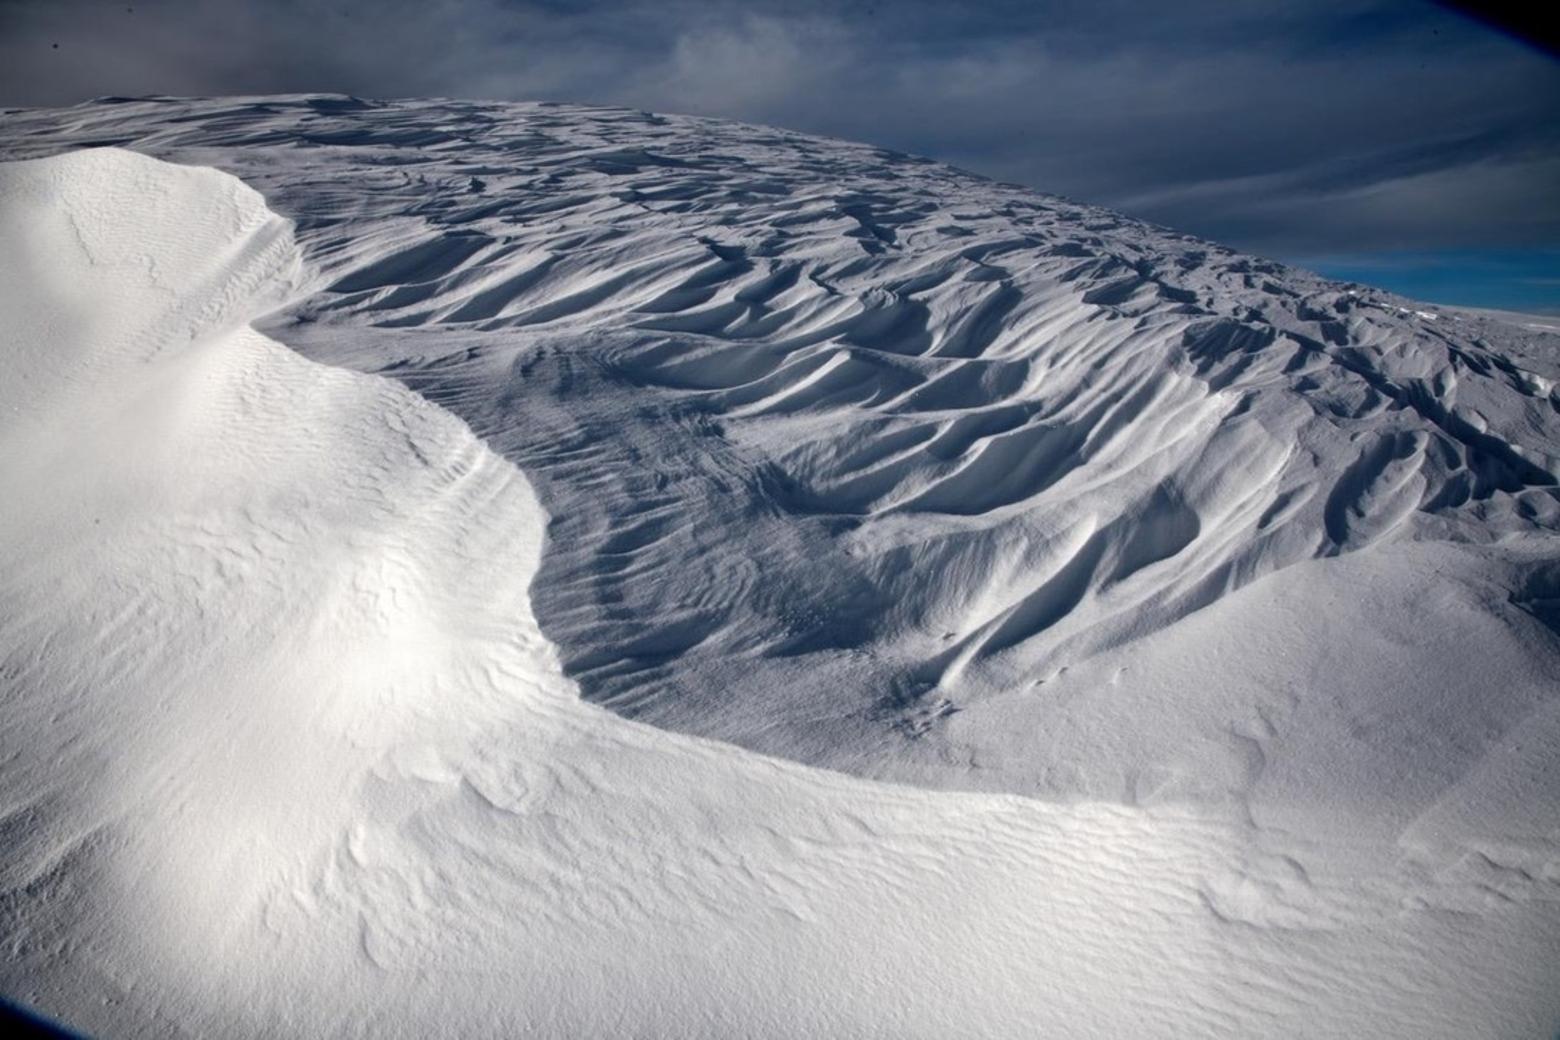 A view from Antarctica or maybe the Far North?  Fuller offers this different explanation from the center of Yellowstone: "After several recent days of a severe storm a cold, clear morning reveals wind-sculpted sastrugi snow taking the form of miniature albino badlands."